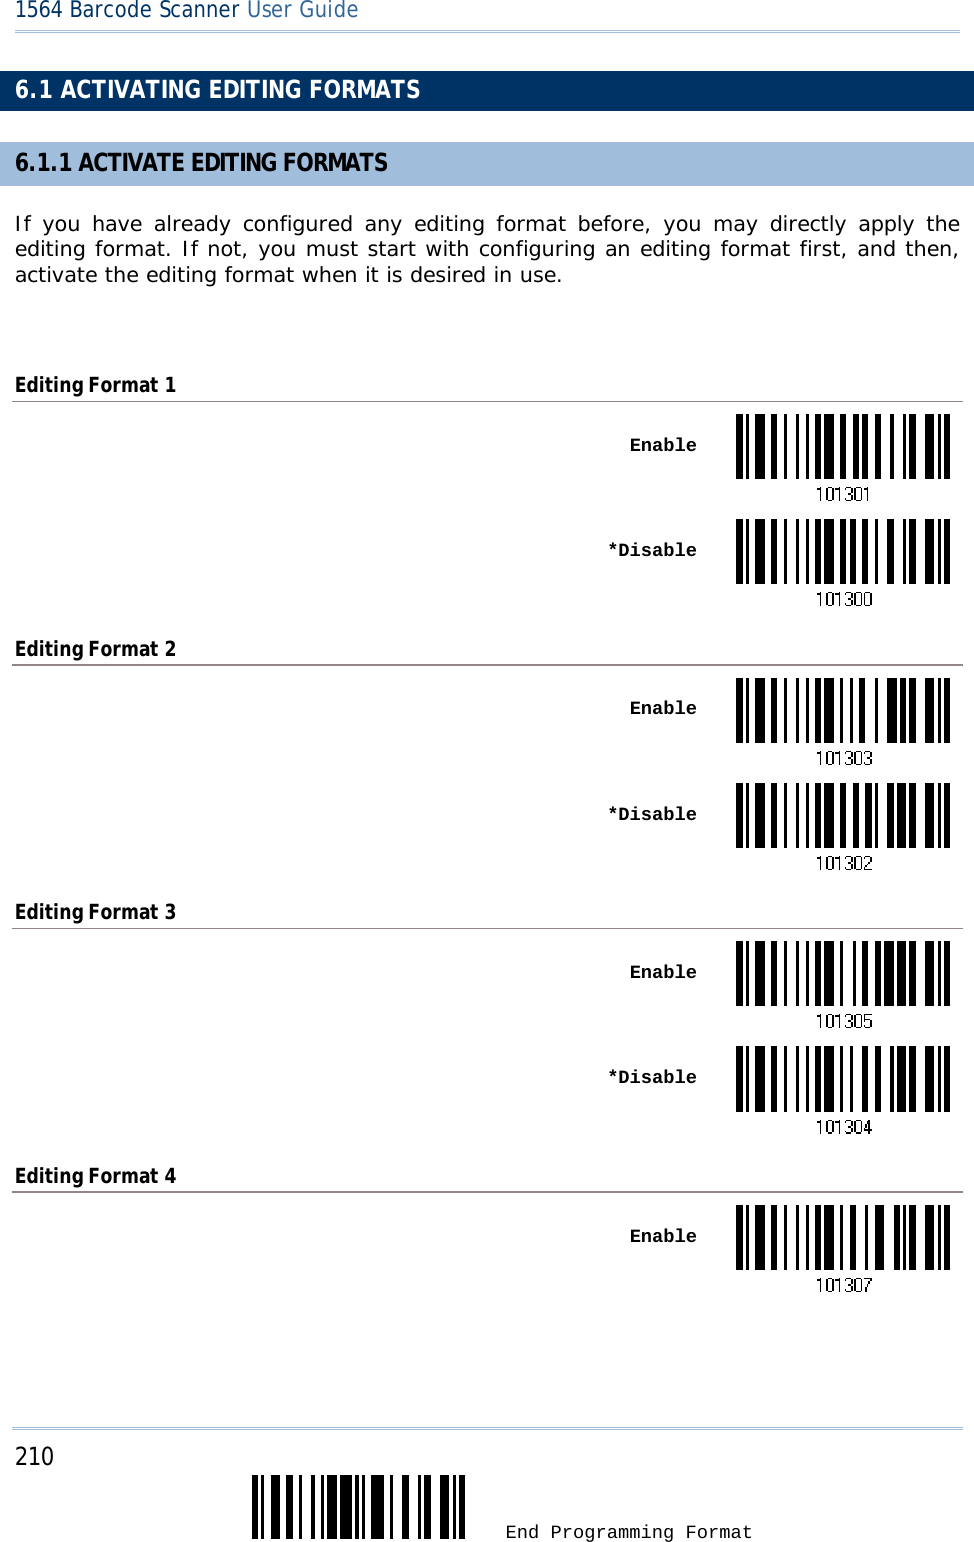 210  End Programming Format 1564 Barcode Scanner User Guide  6.1 ACTIVATING EDITING FORMATS 6.1.1 ACTIVATE EDITING FORMATS If you have already configured any editing format before, you may directly apply the editing format. If not, you must start with configuring an editing format first, and then, activate the editing format when it is desired in use.  Editing Format 1  Enable *DisableEditing Format 2  Enable *DisableEditing Format 3  Enable *DisableEditing Format 4  Enable